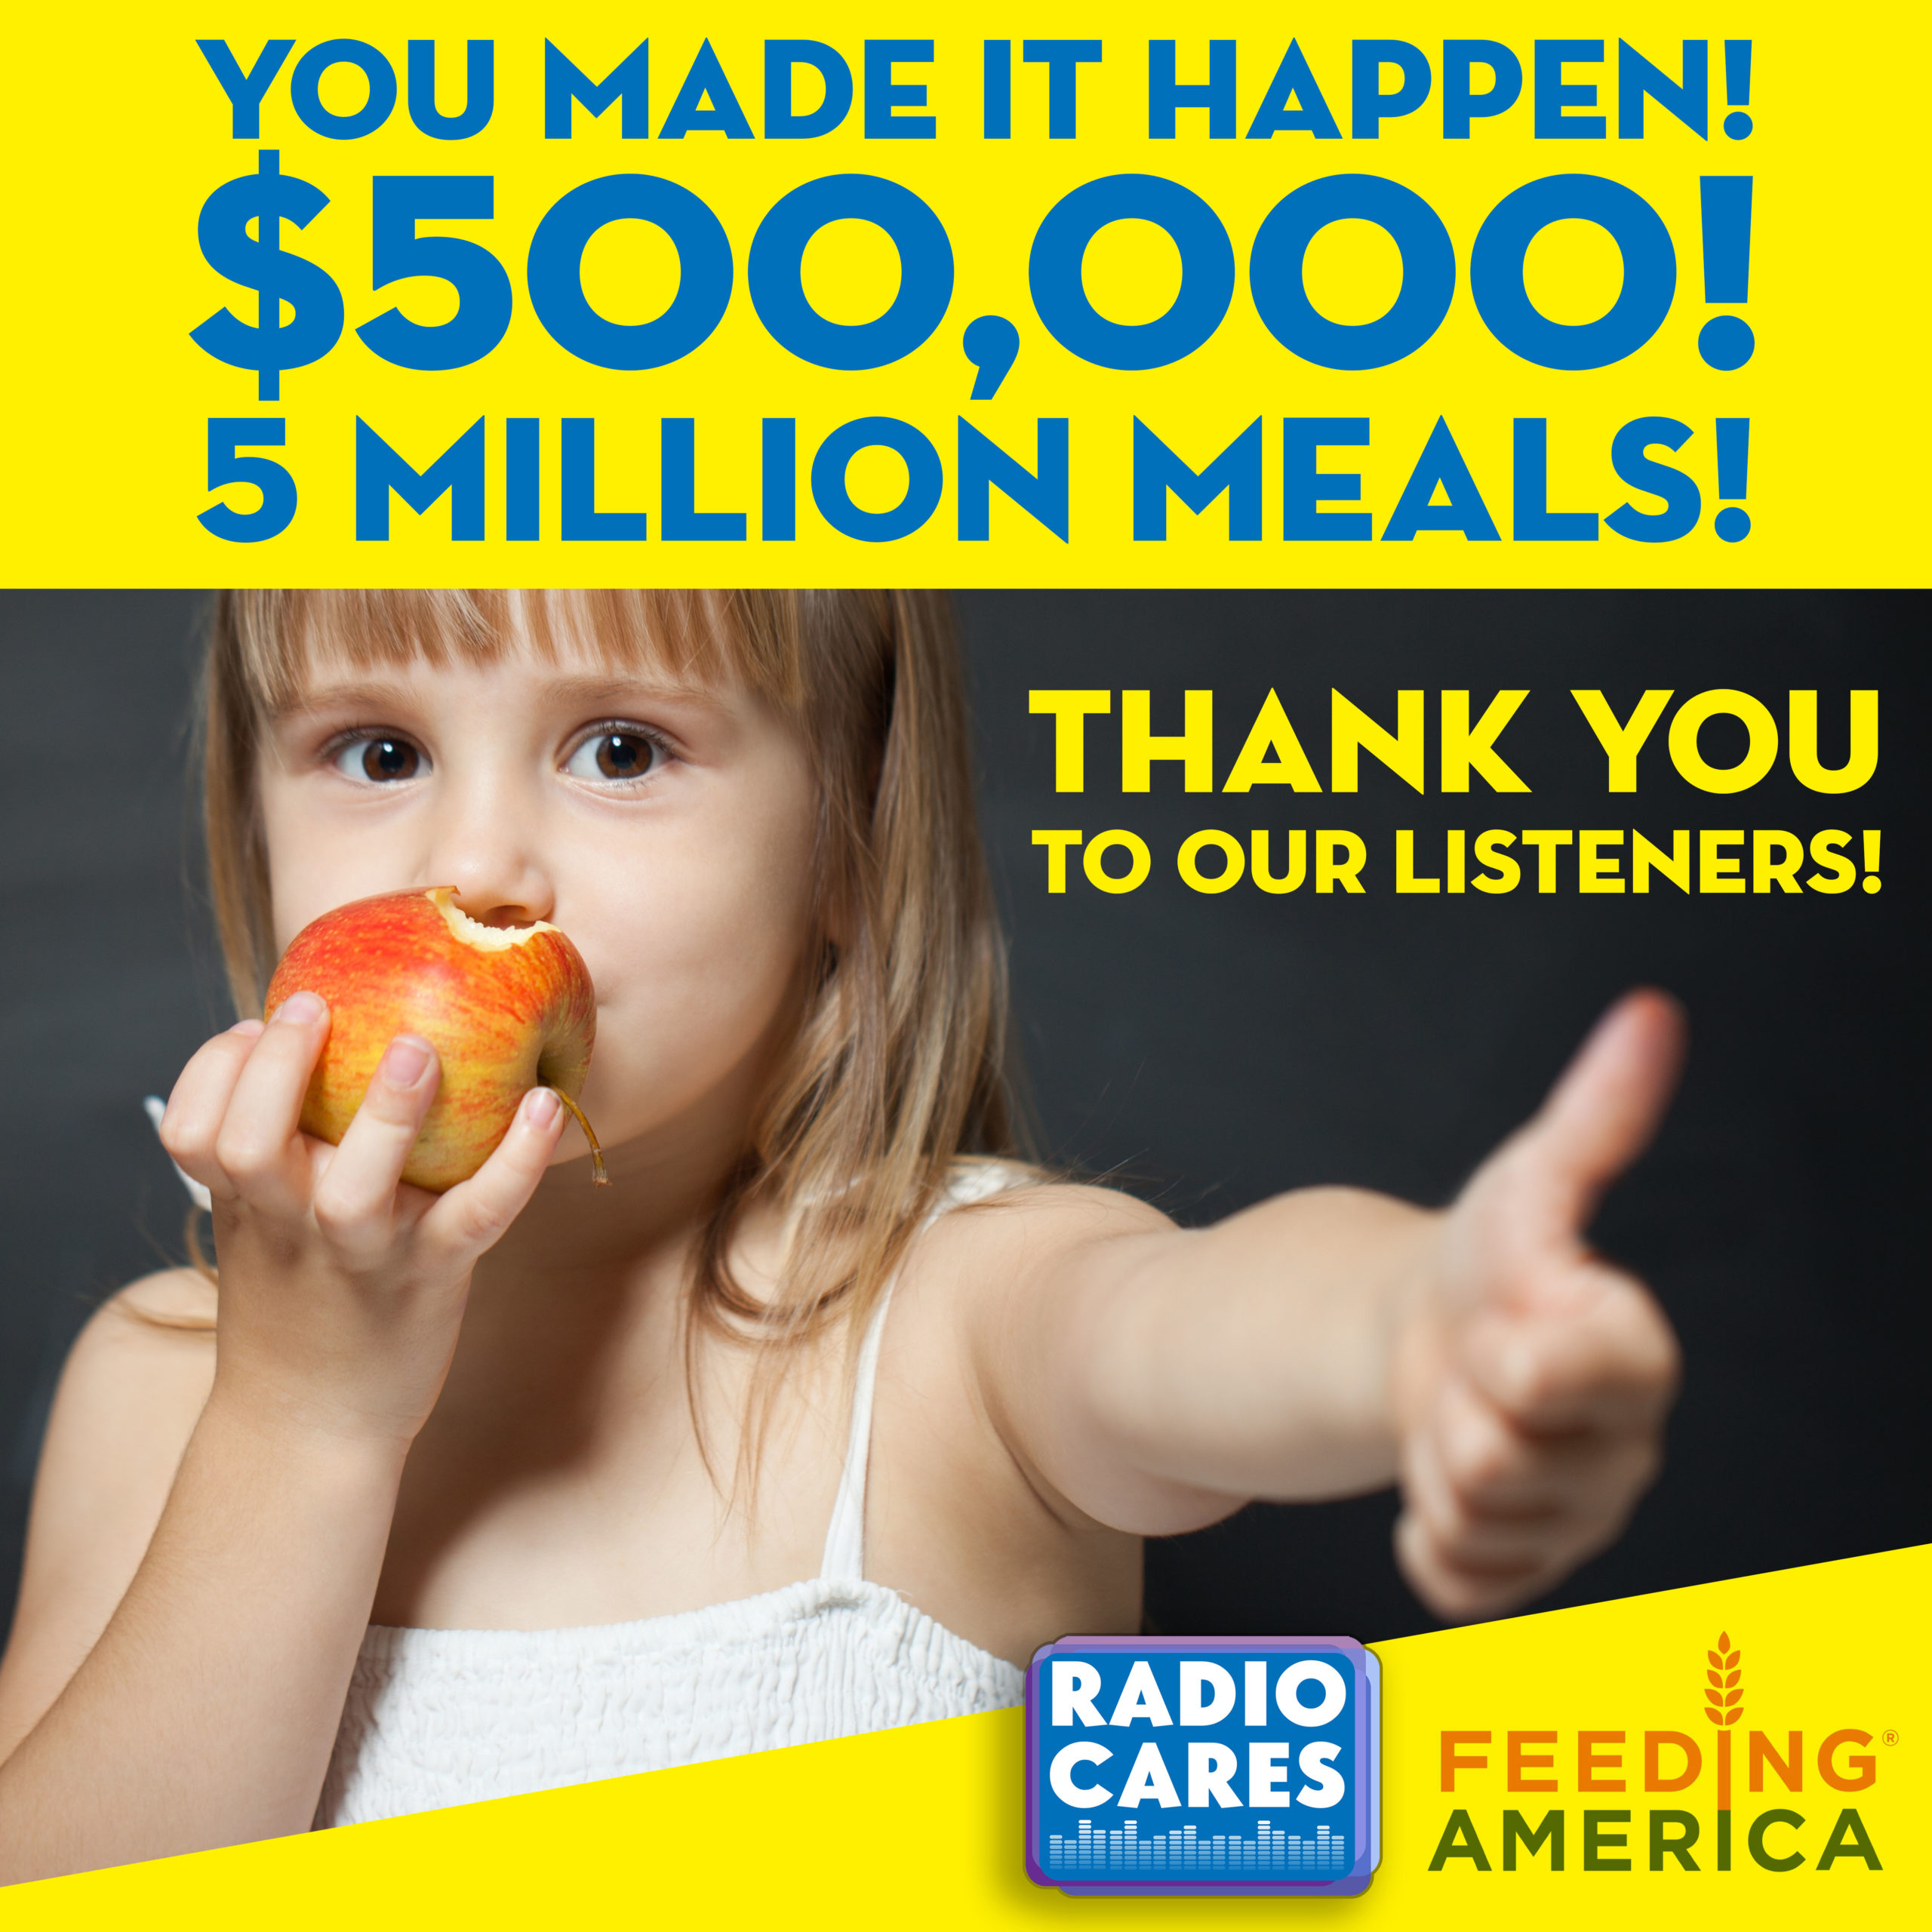 Feeding America final tally! Thanks to you our great listeners!